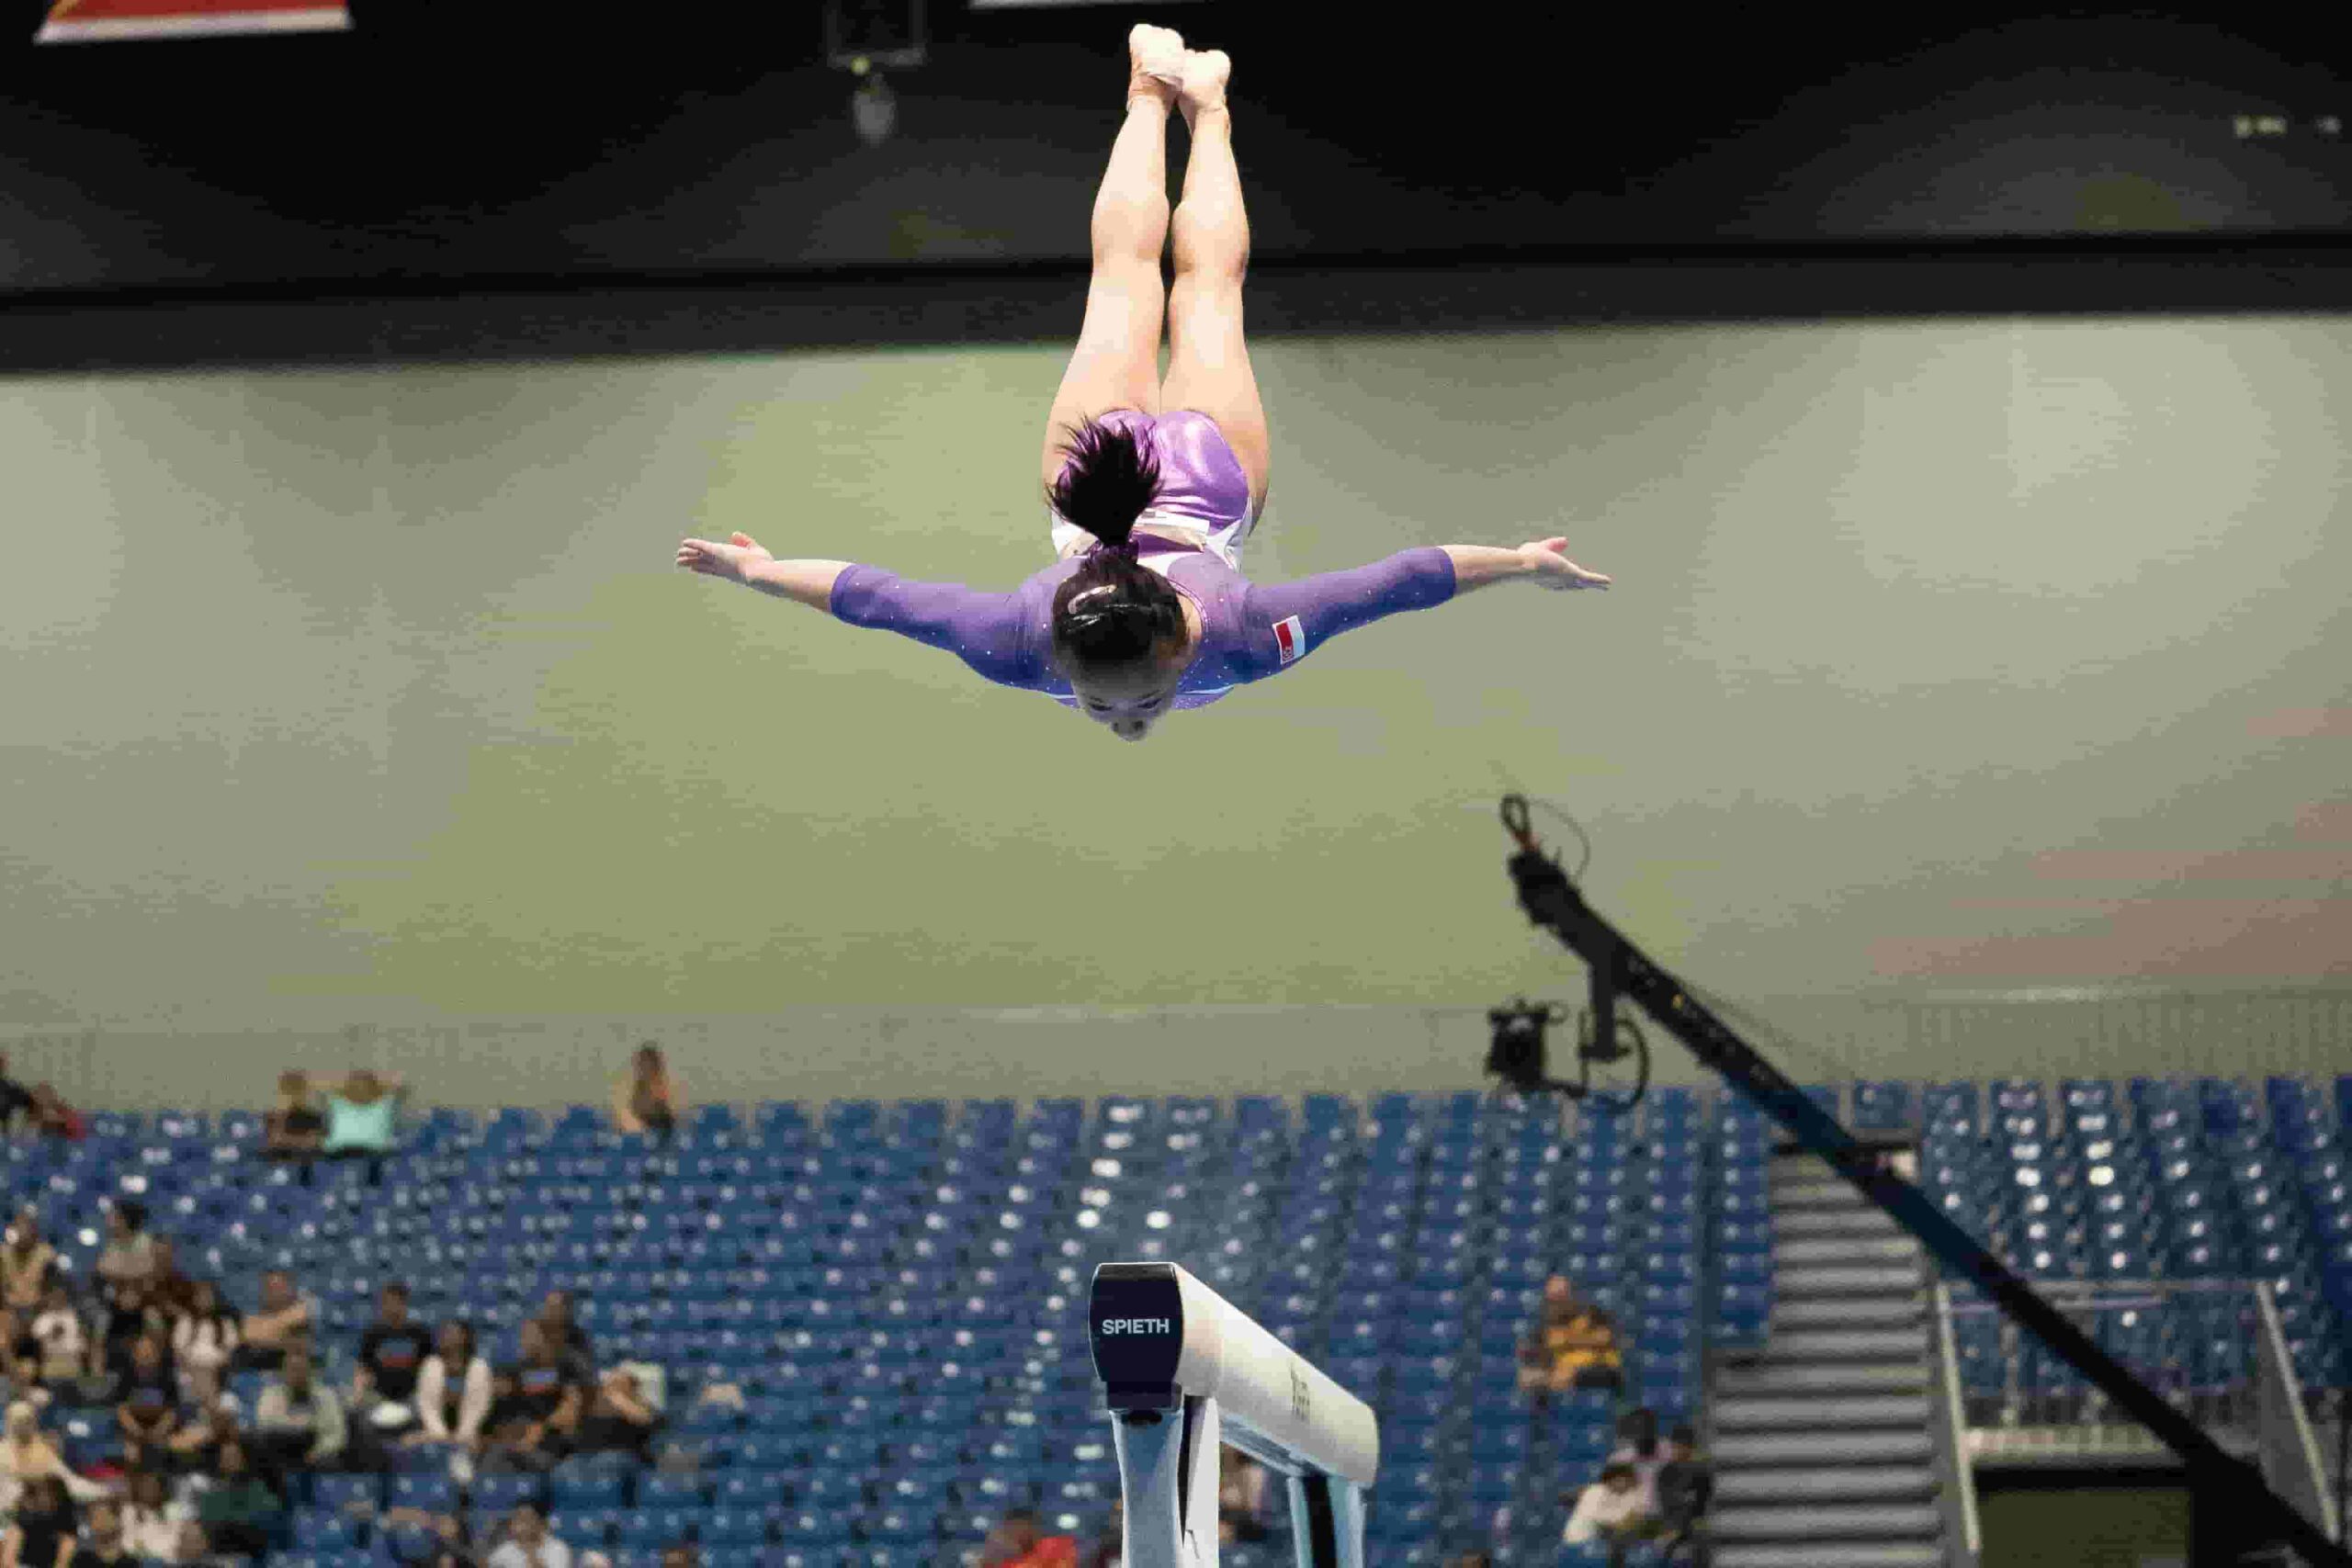 The Artistry and Athleticism of Sports Acrobatic Gymnastics